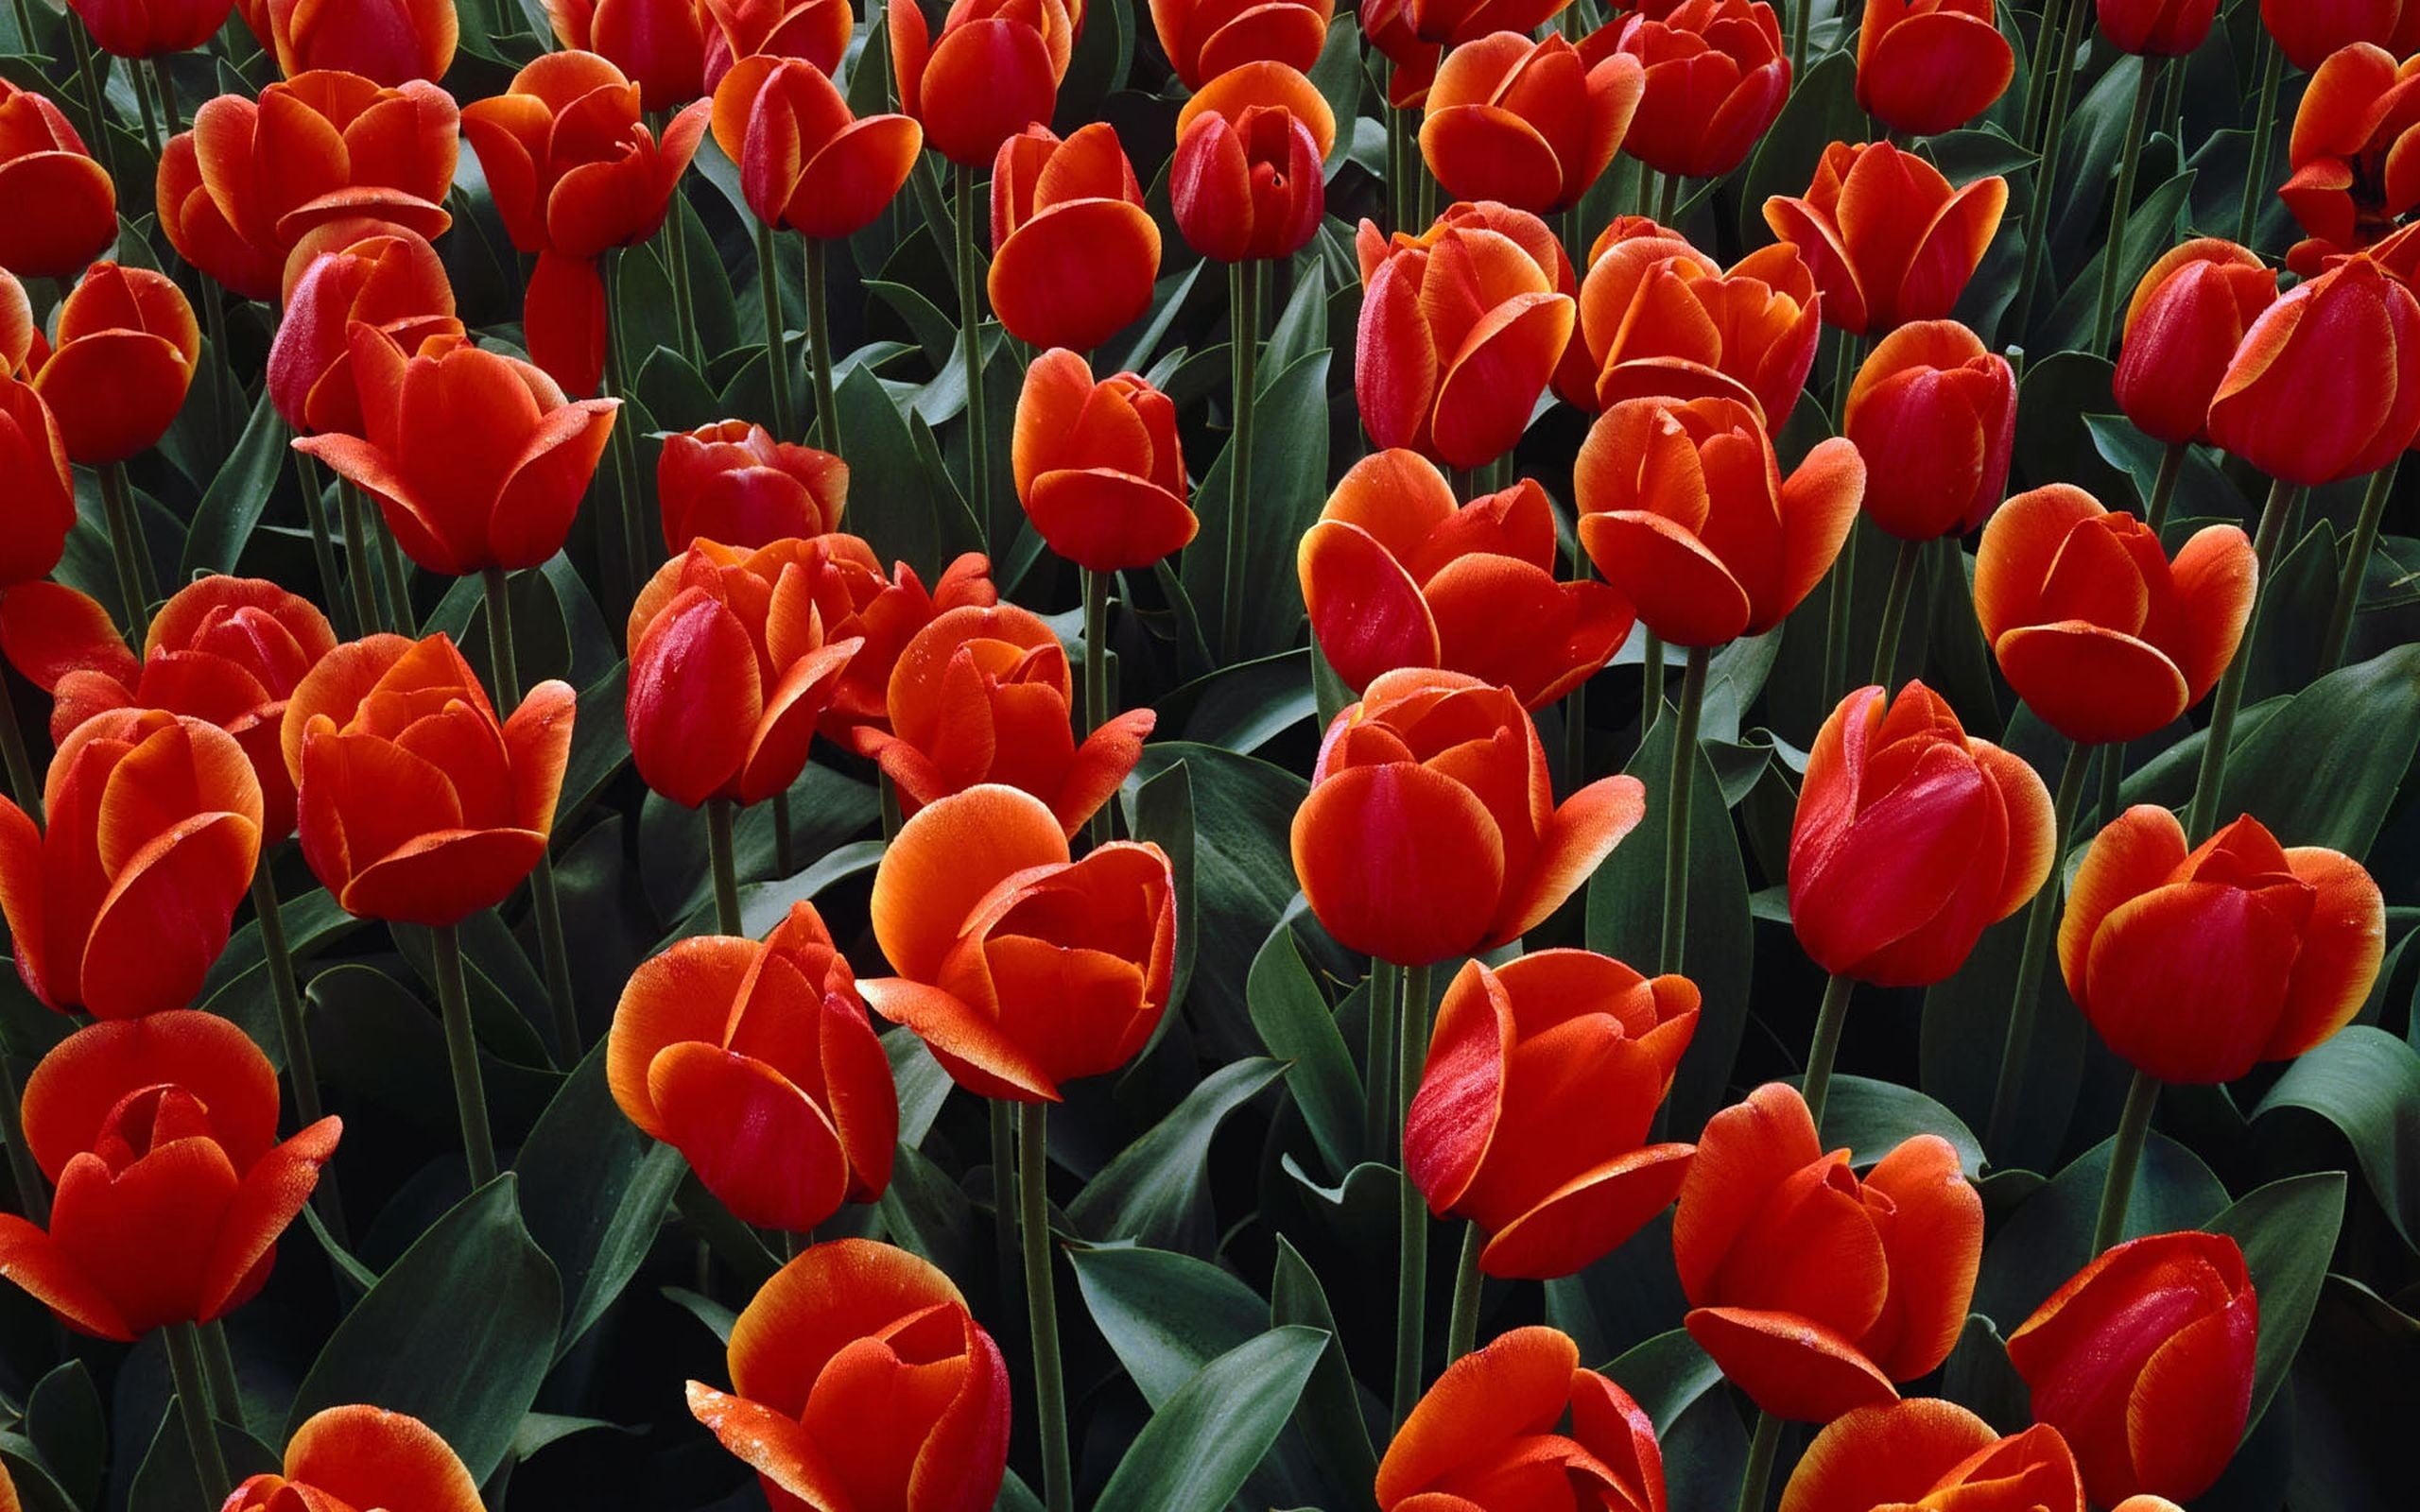 red Tulips flower field close-up photo during daytime